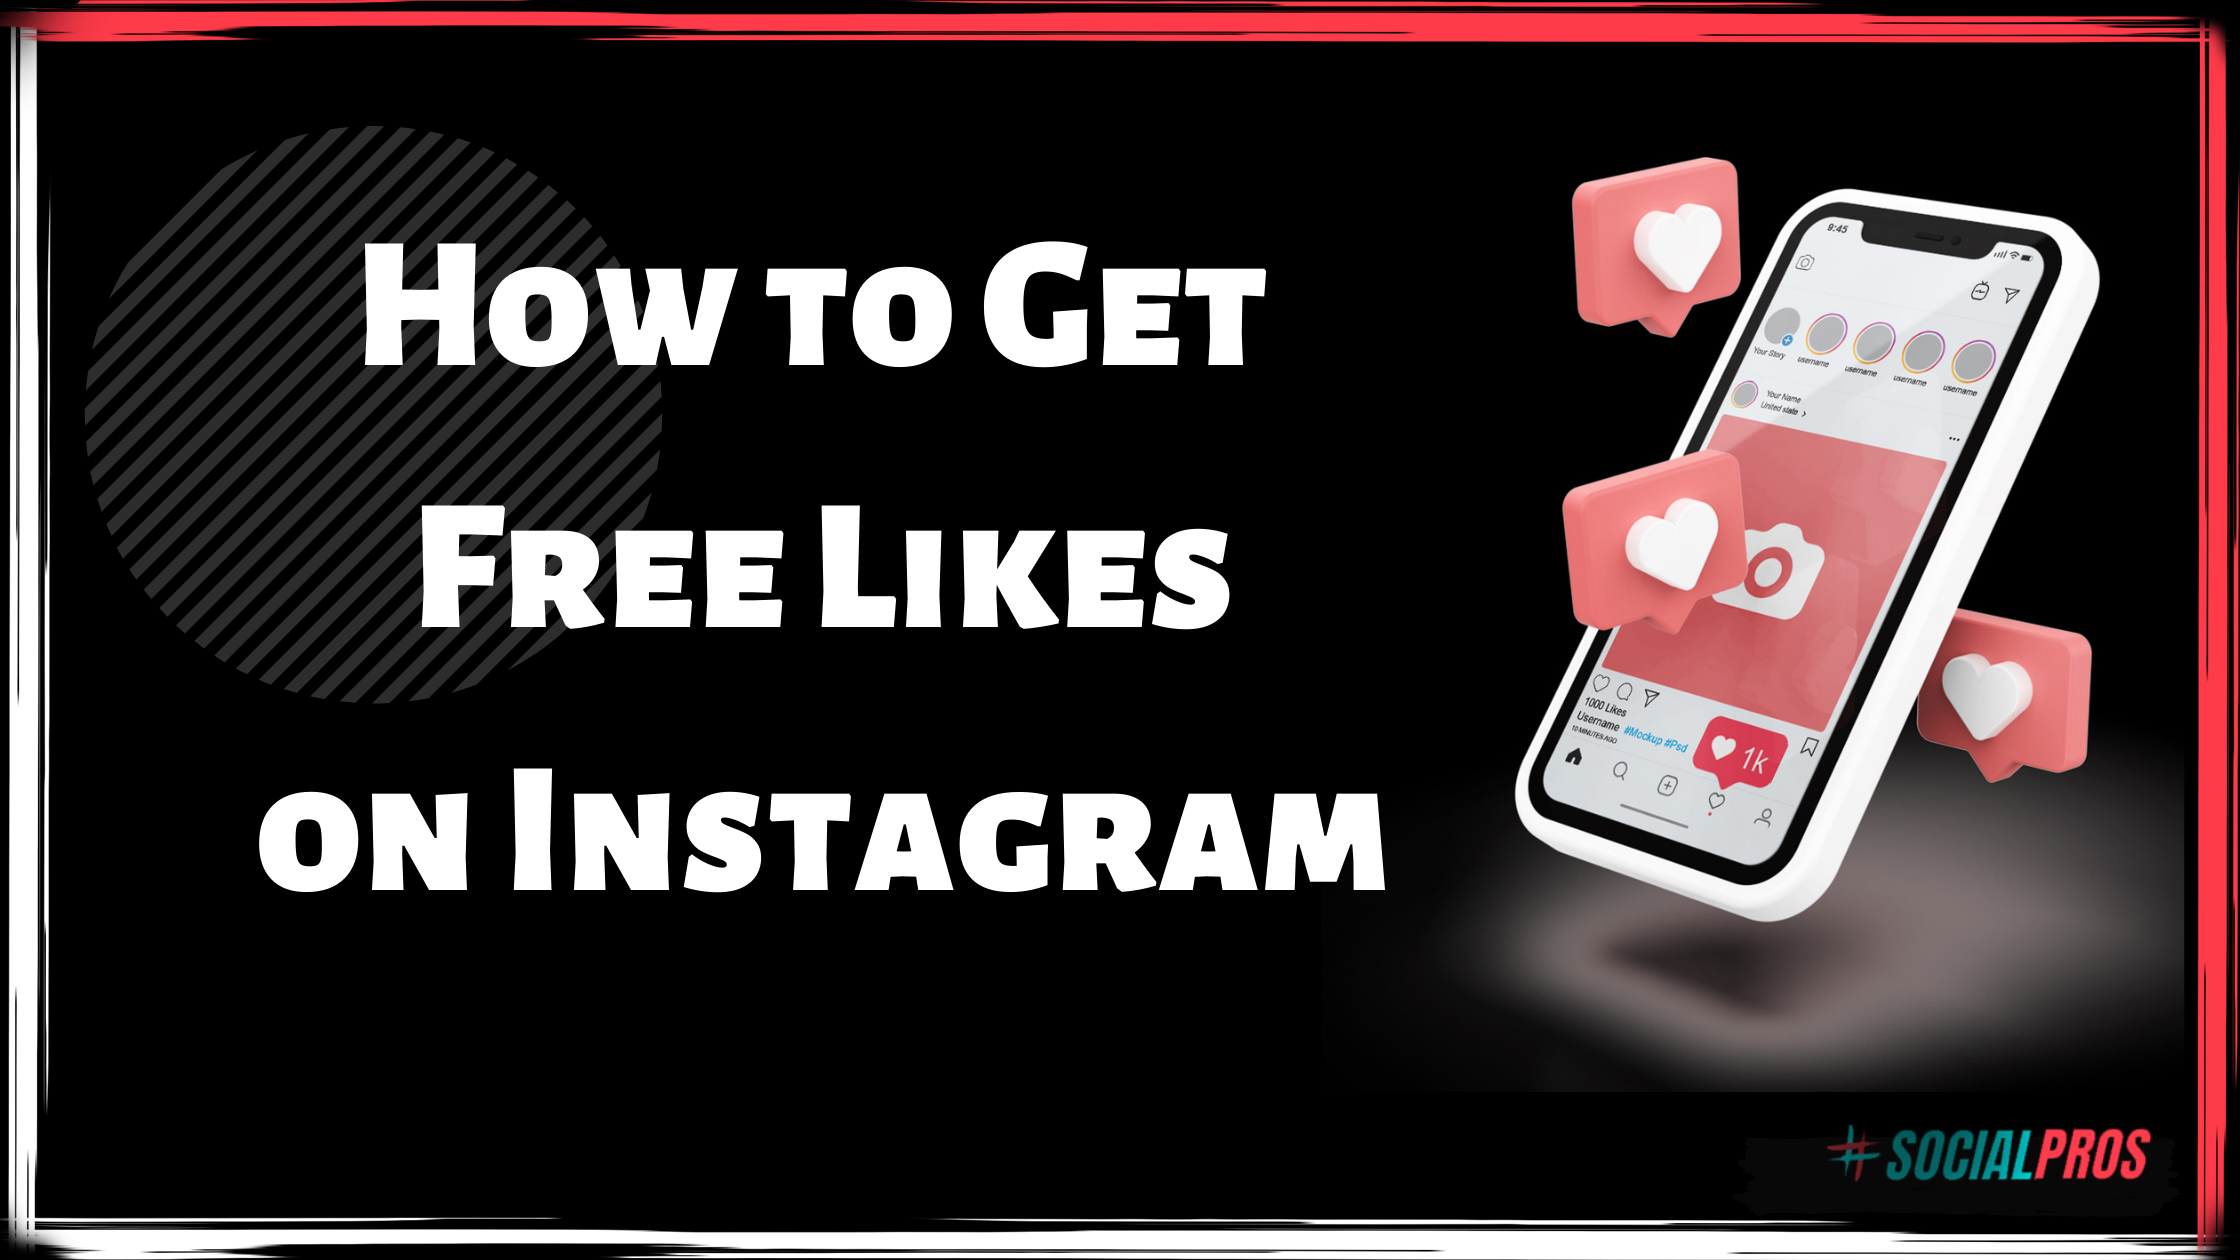 How to Get Free Likes on Instagram